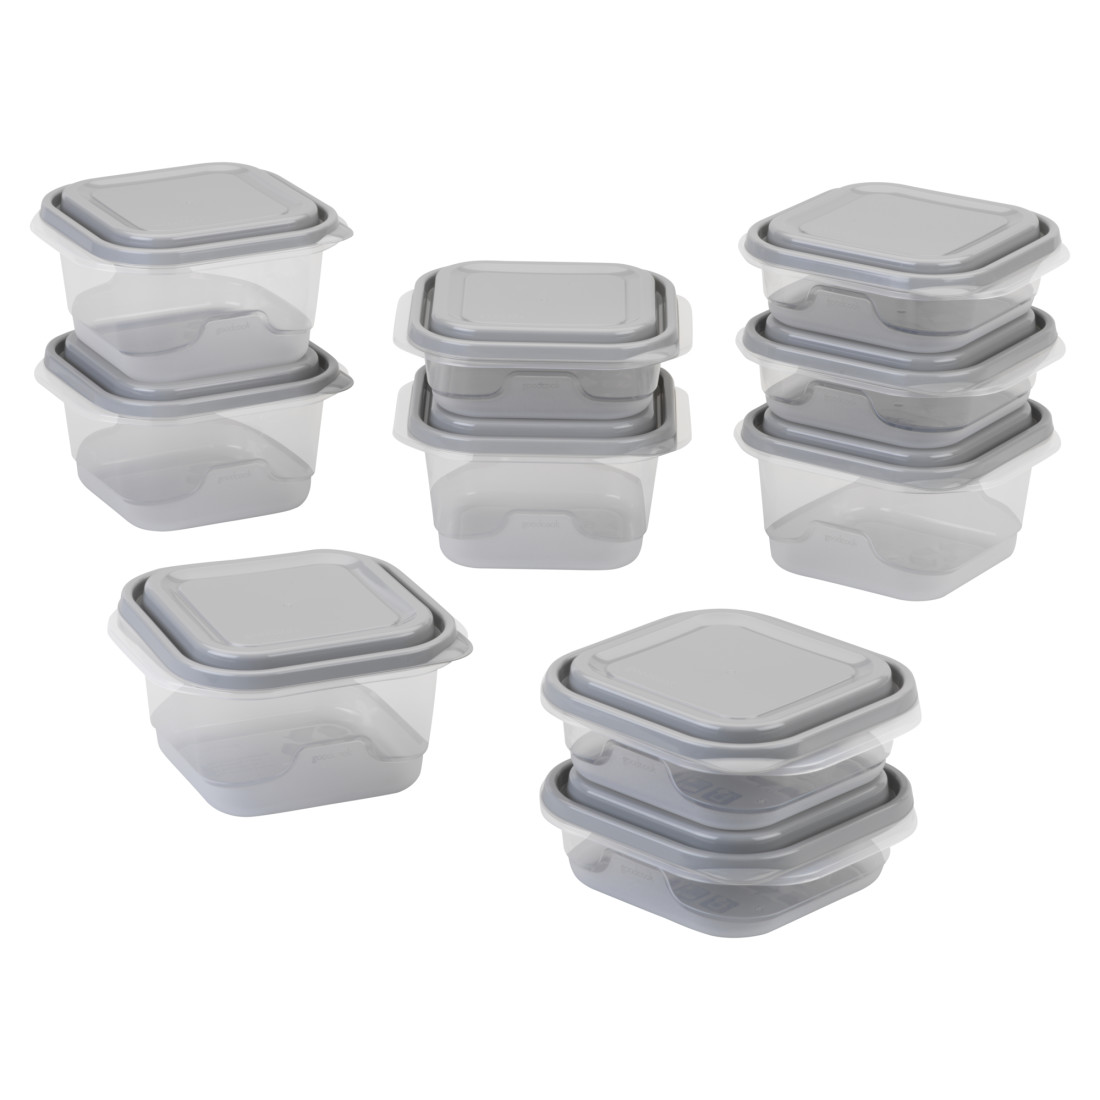 Save on Goodcook Cereal Container Side Latching 24.4 Cups Order